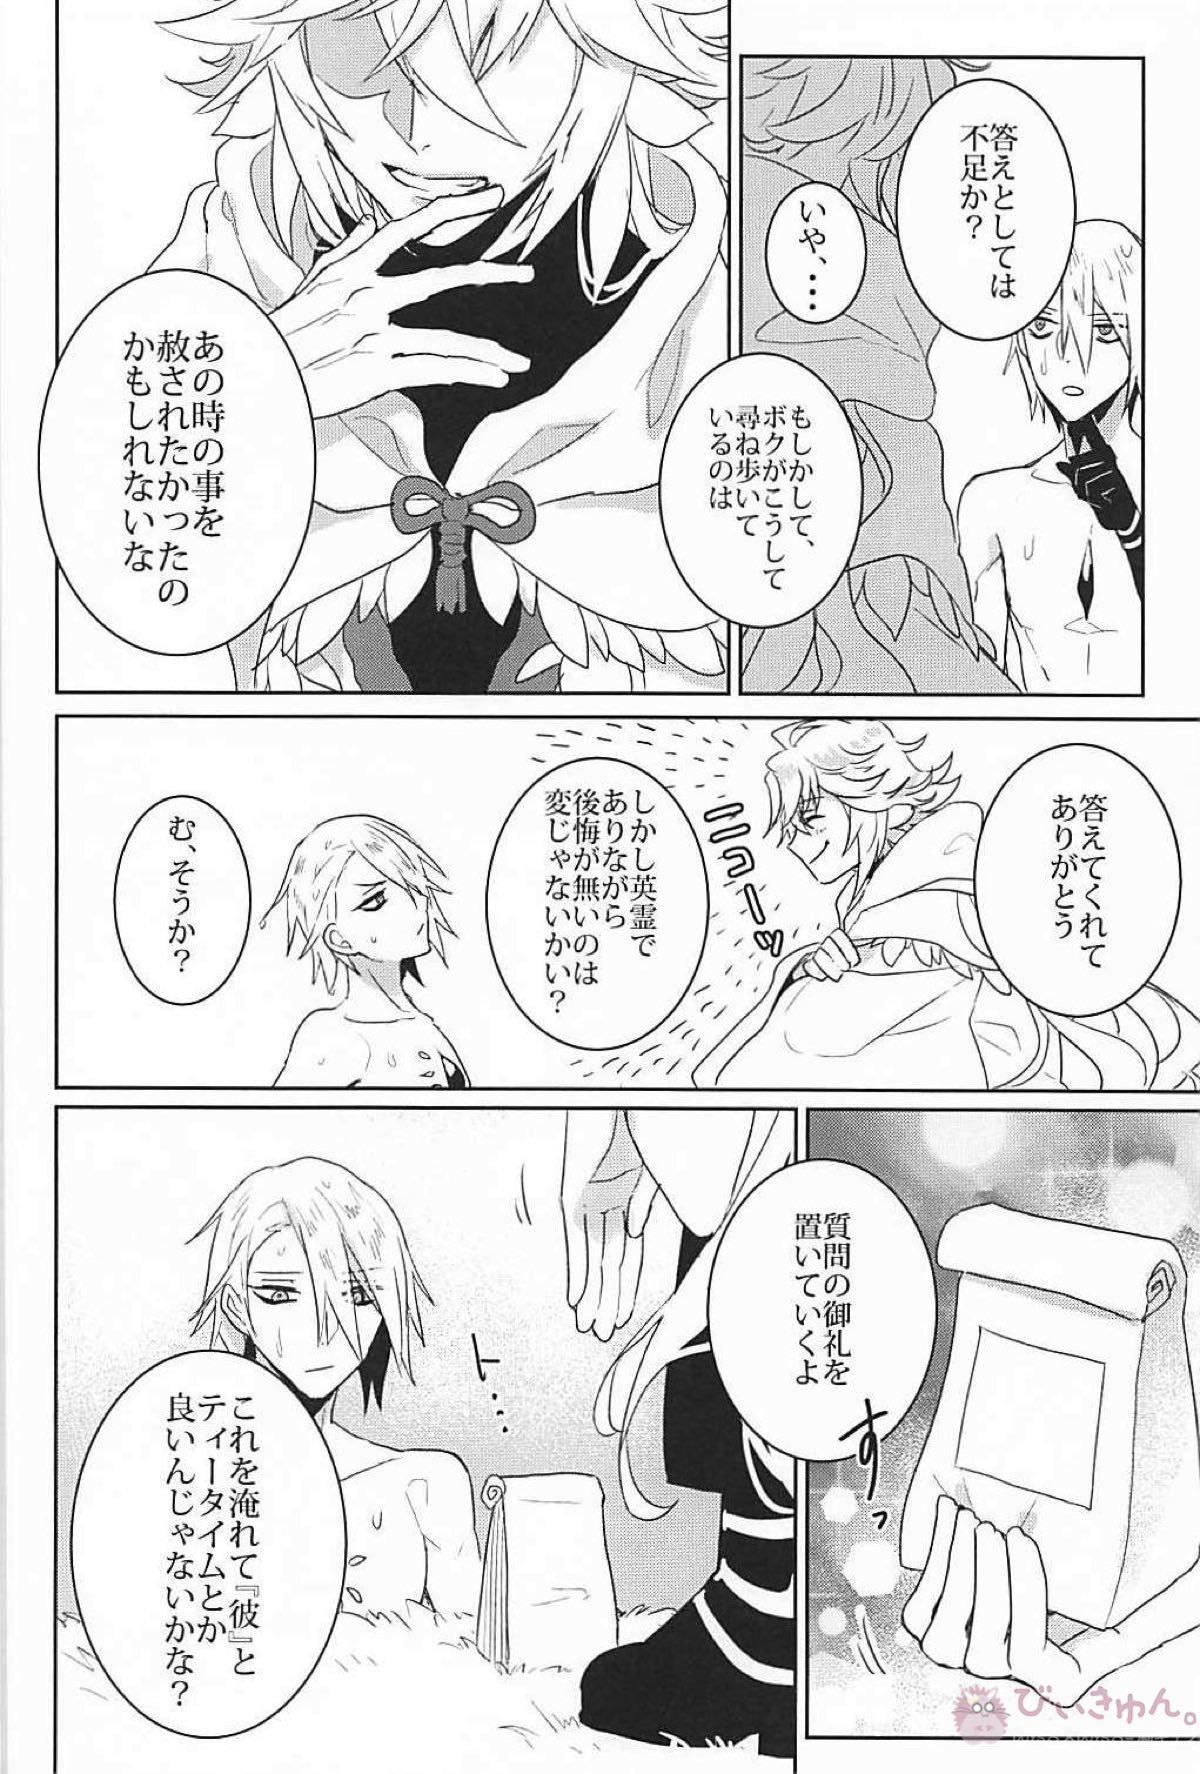 Rubia humanNNoise - Fate grand order Uncut - Page 11